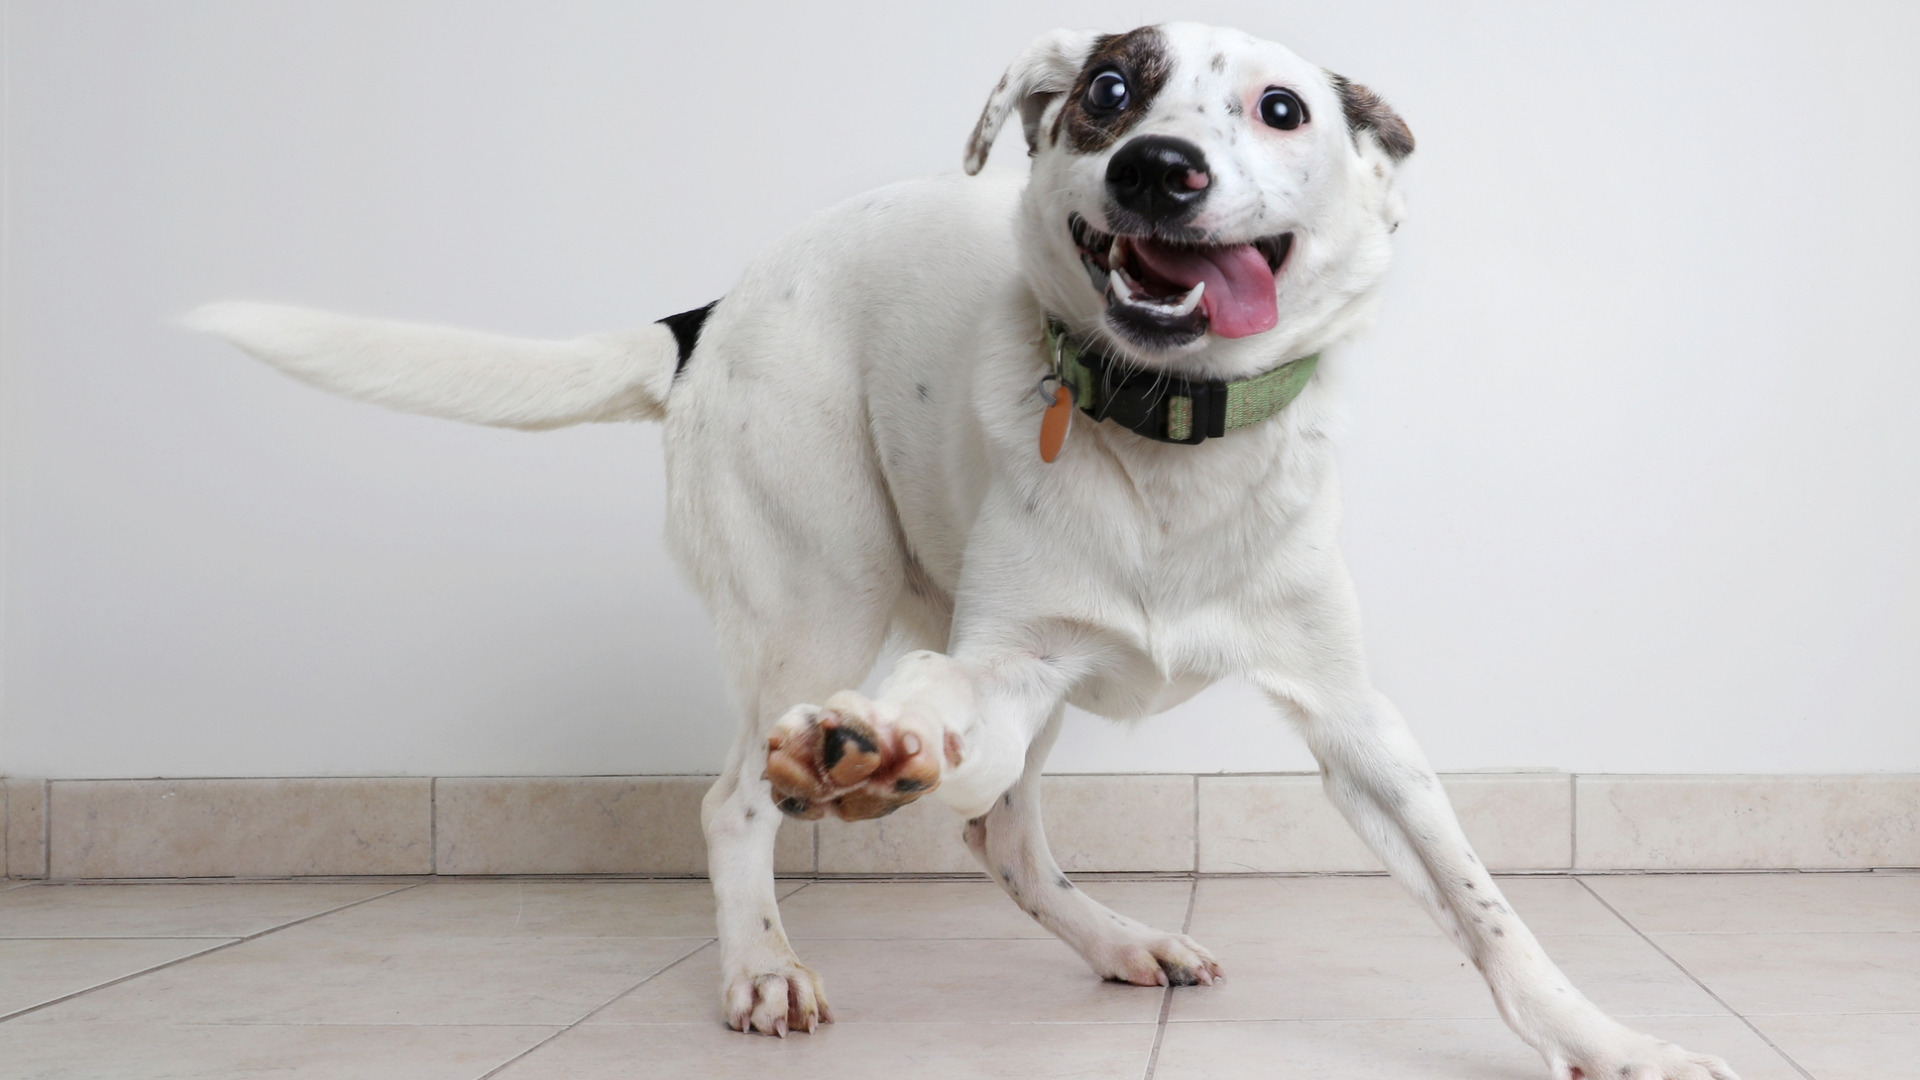 a small, mostly white dog moving jofully on a tile floor